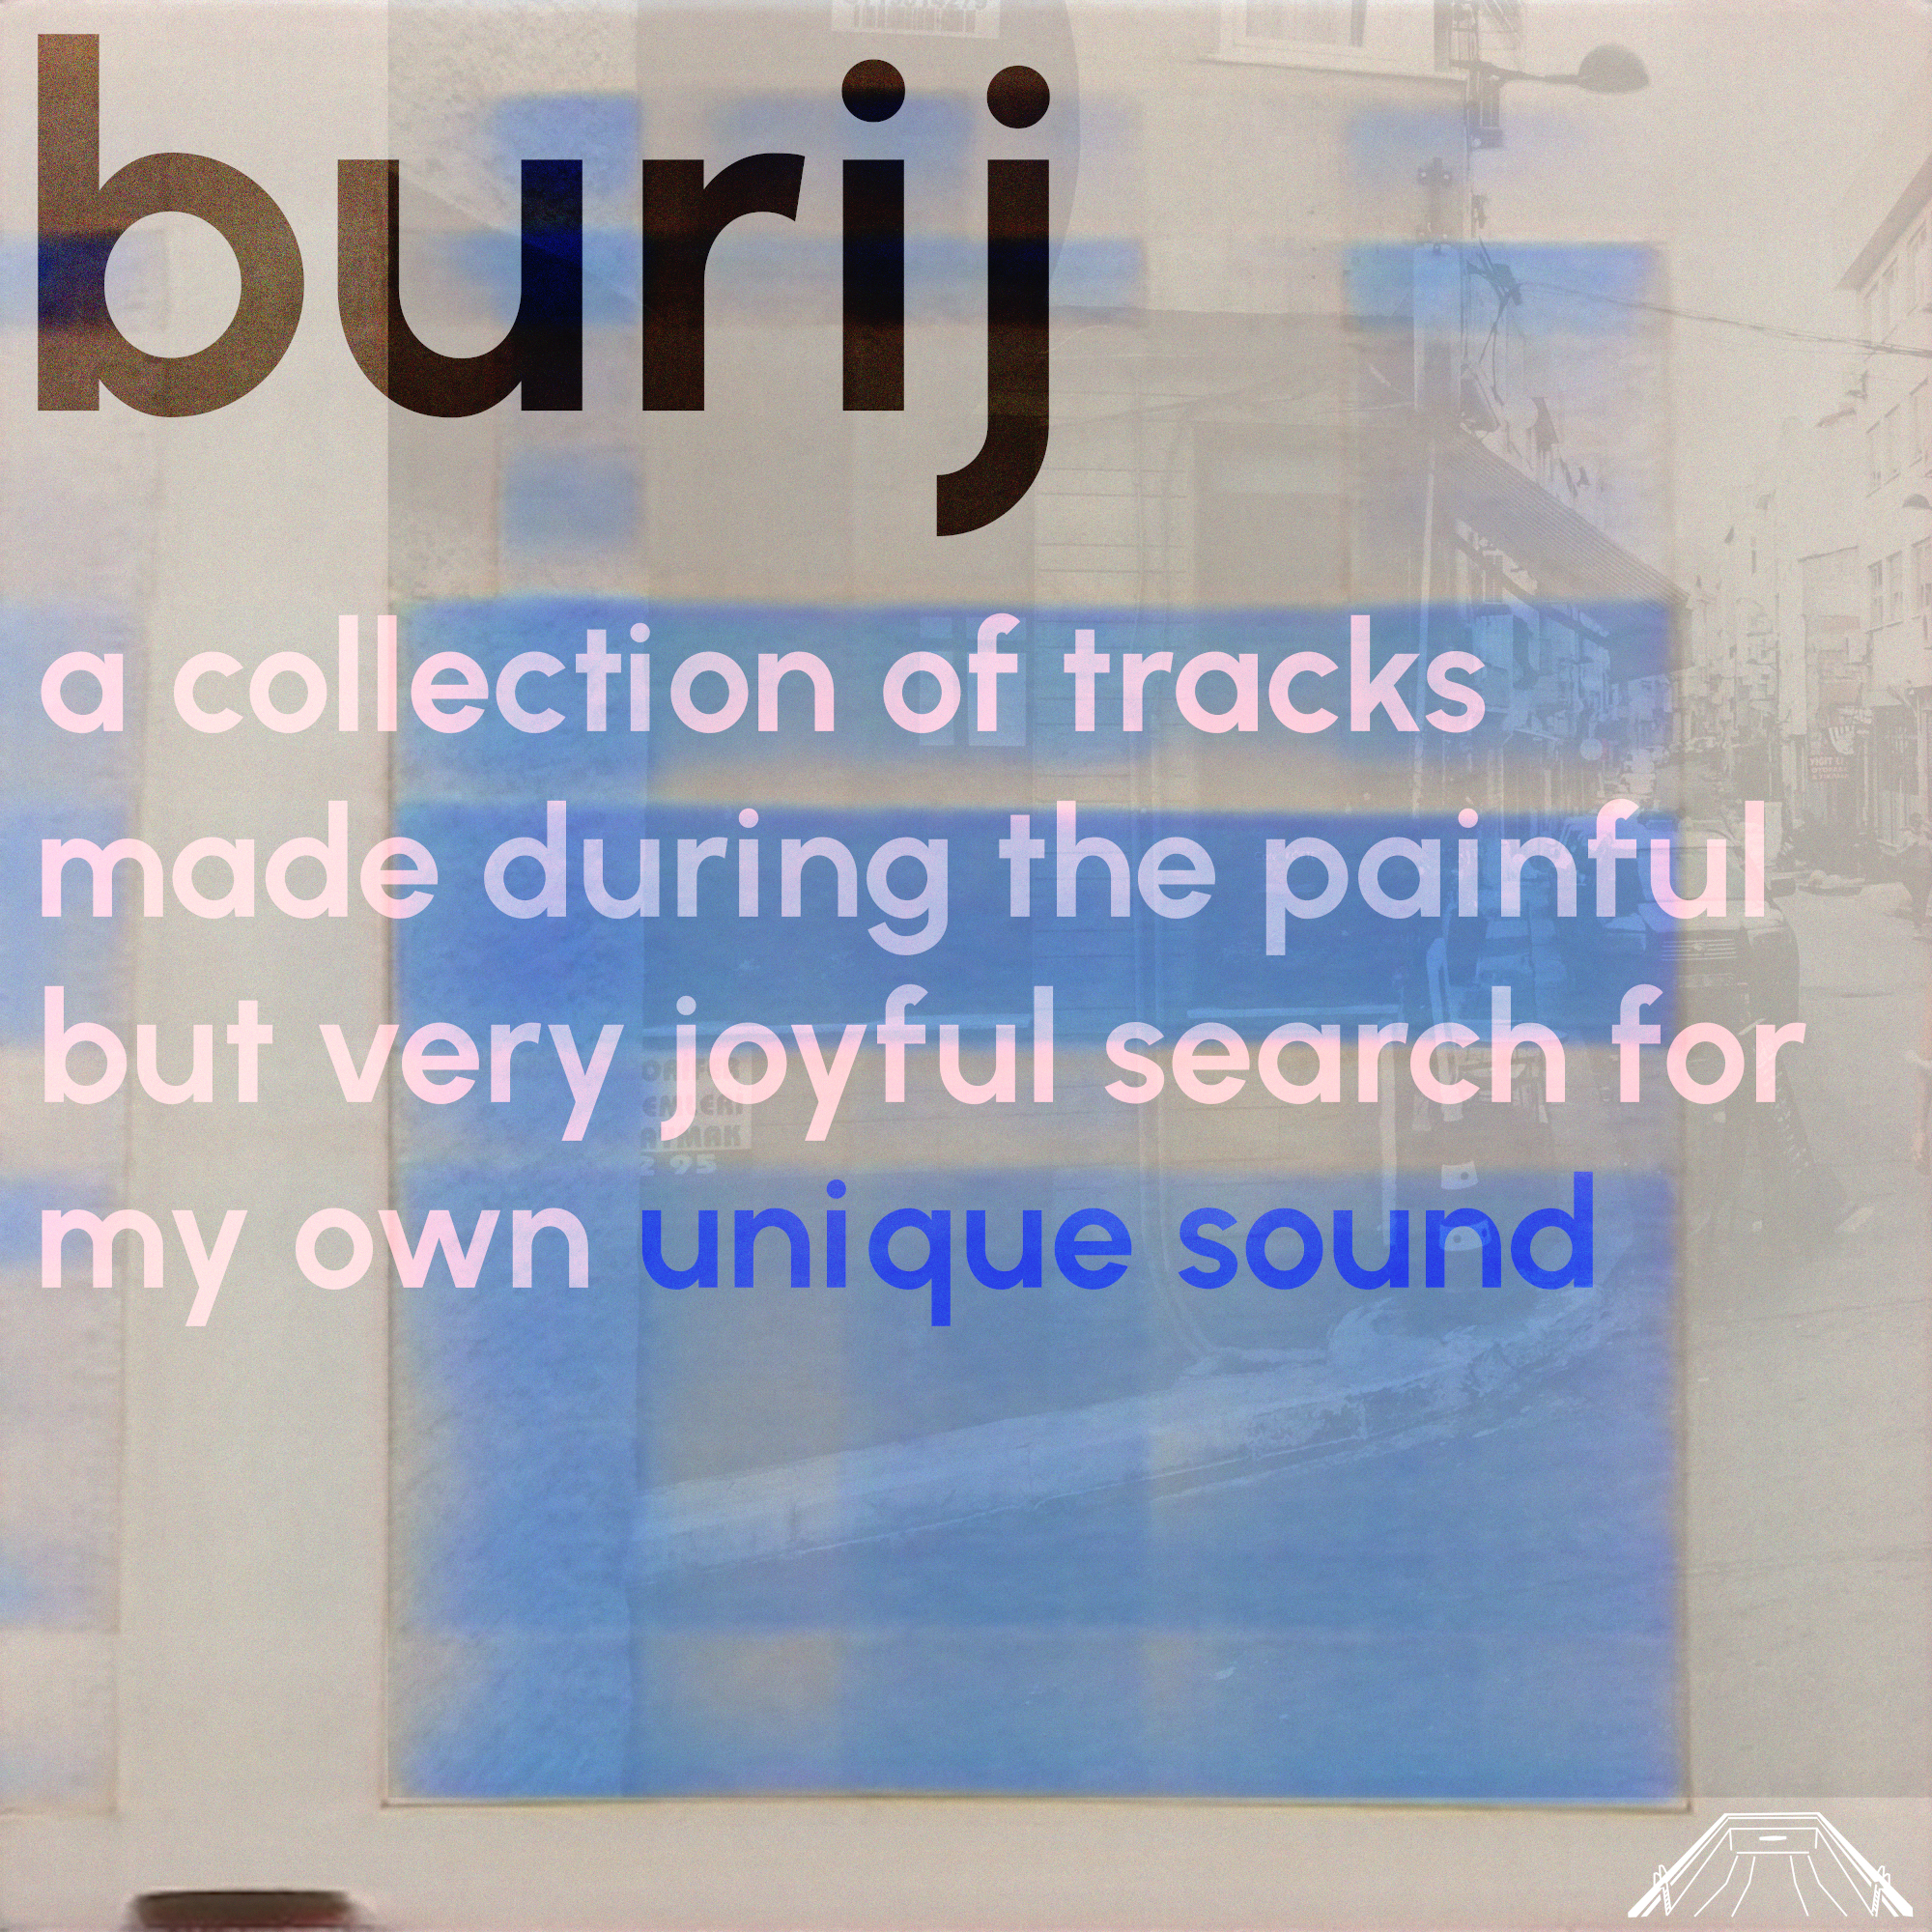 burij – a collection of tracks made during the painful but very joyful search for my own unique sound